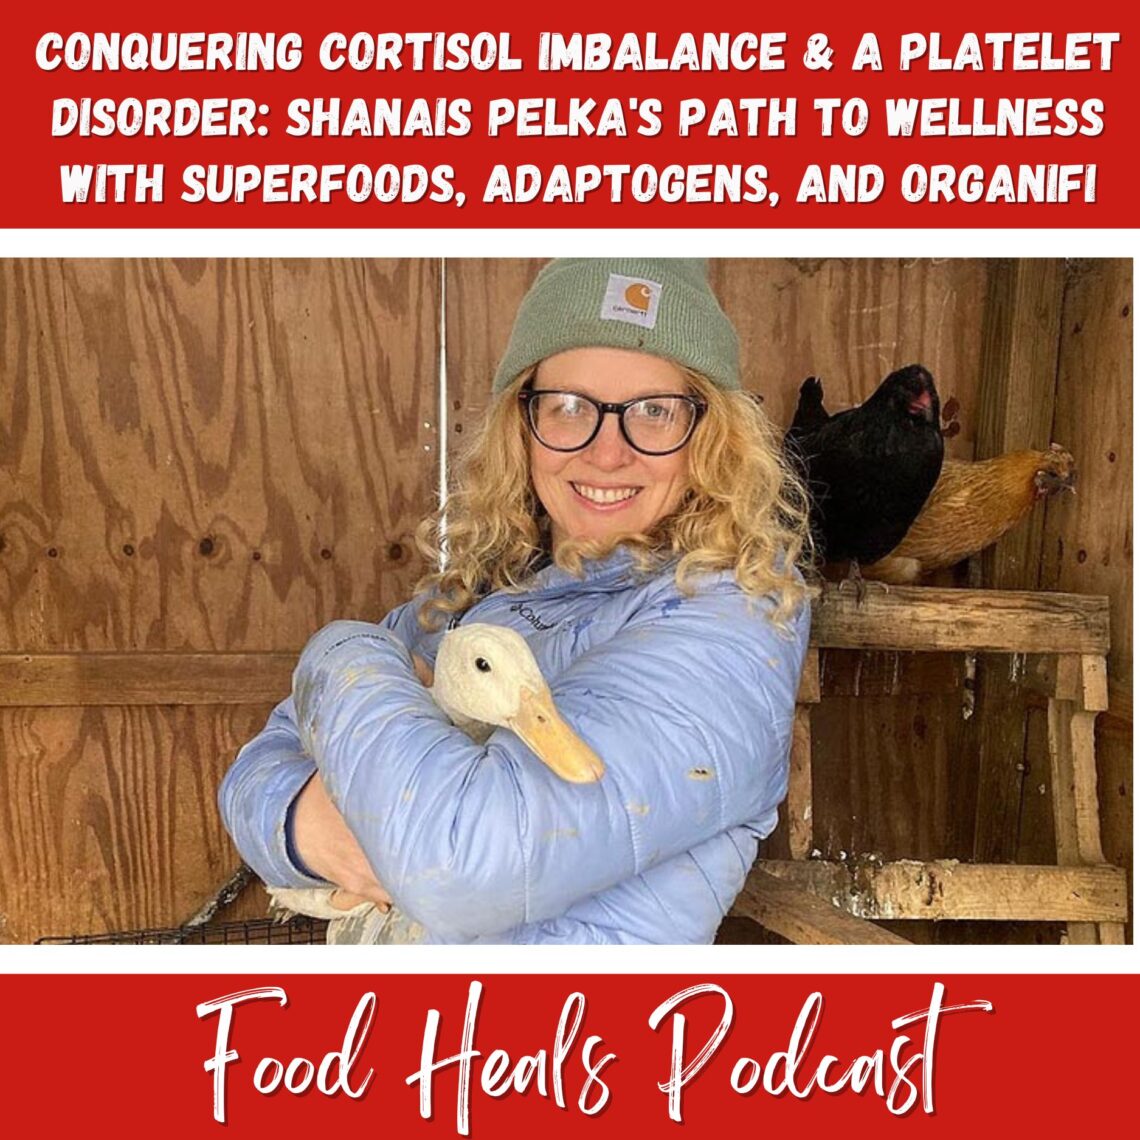 Conquering Cortisol Imbalance & a Platelet Disorder: Shanais Pelka's Path to Wellness with Superfoods, Adaptogens, and Organifi